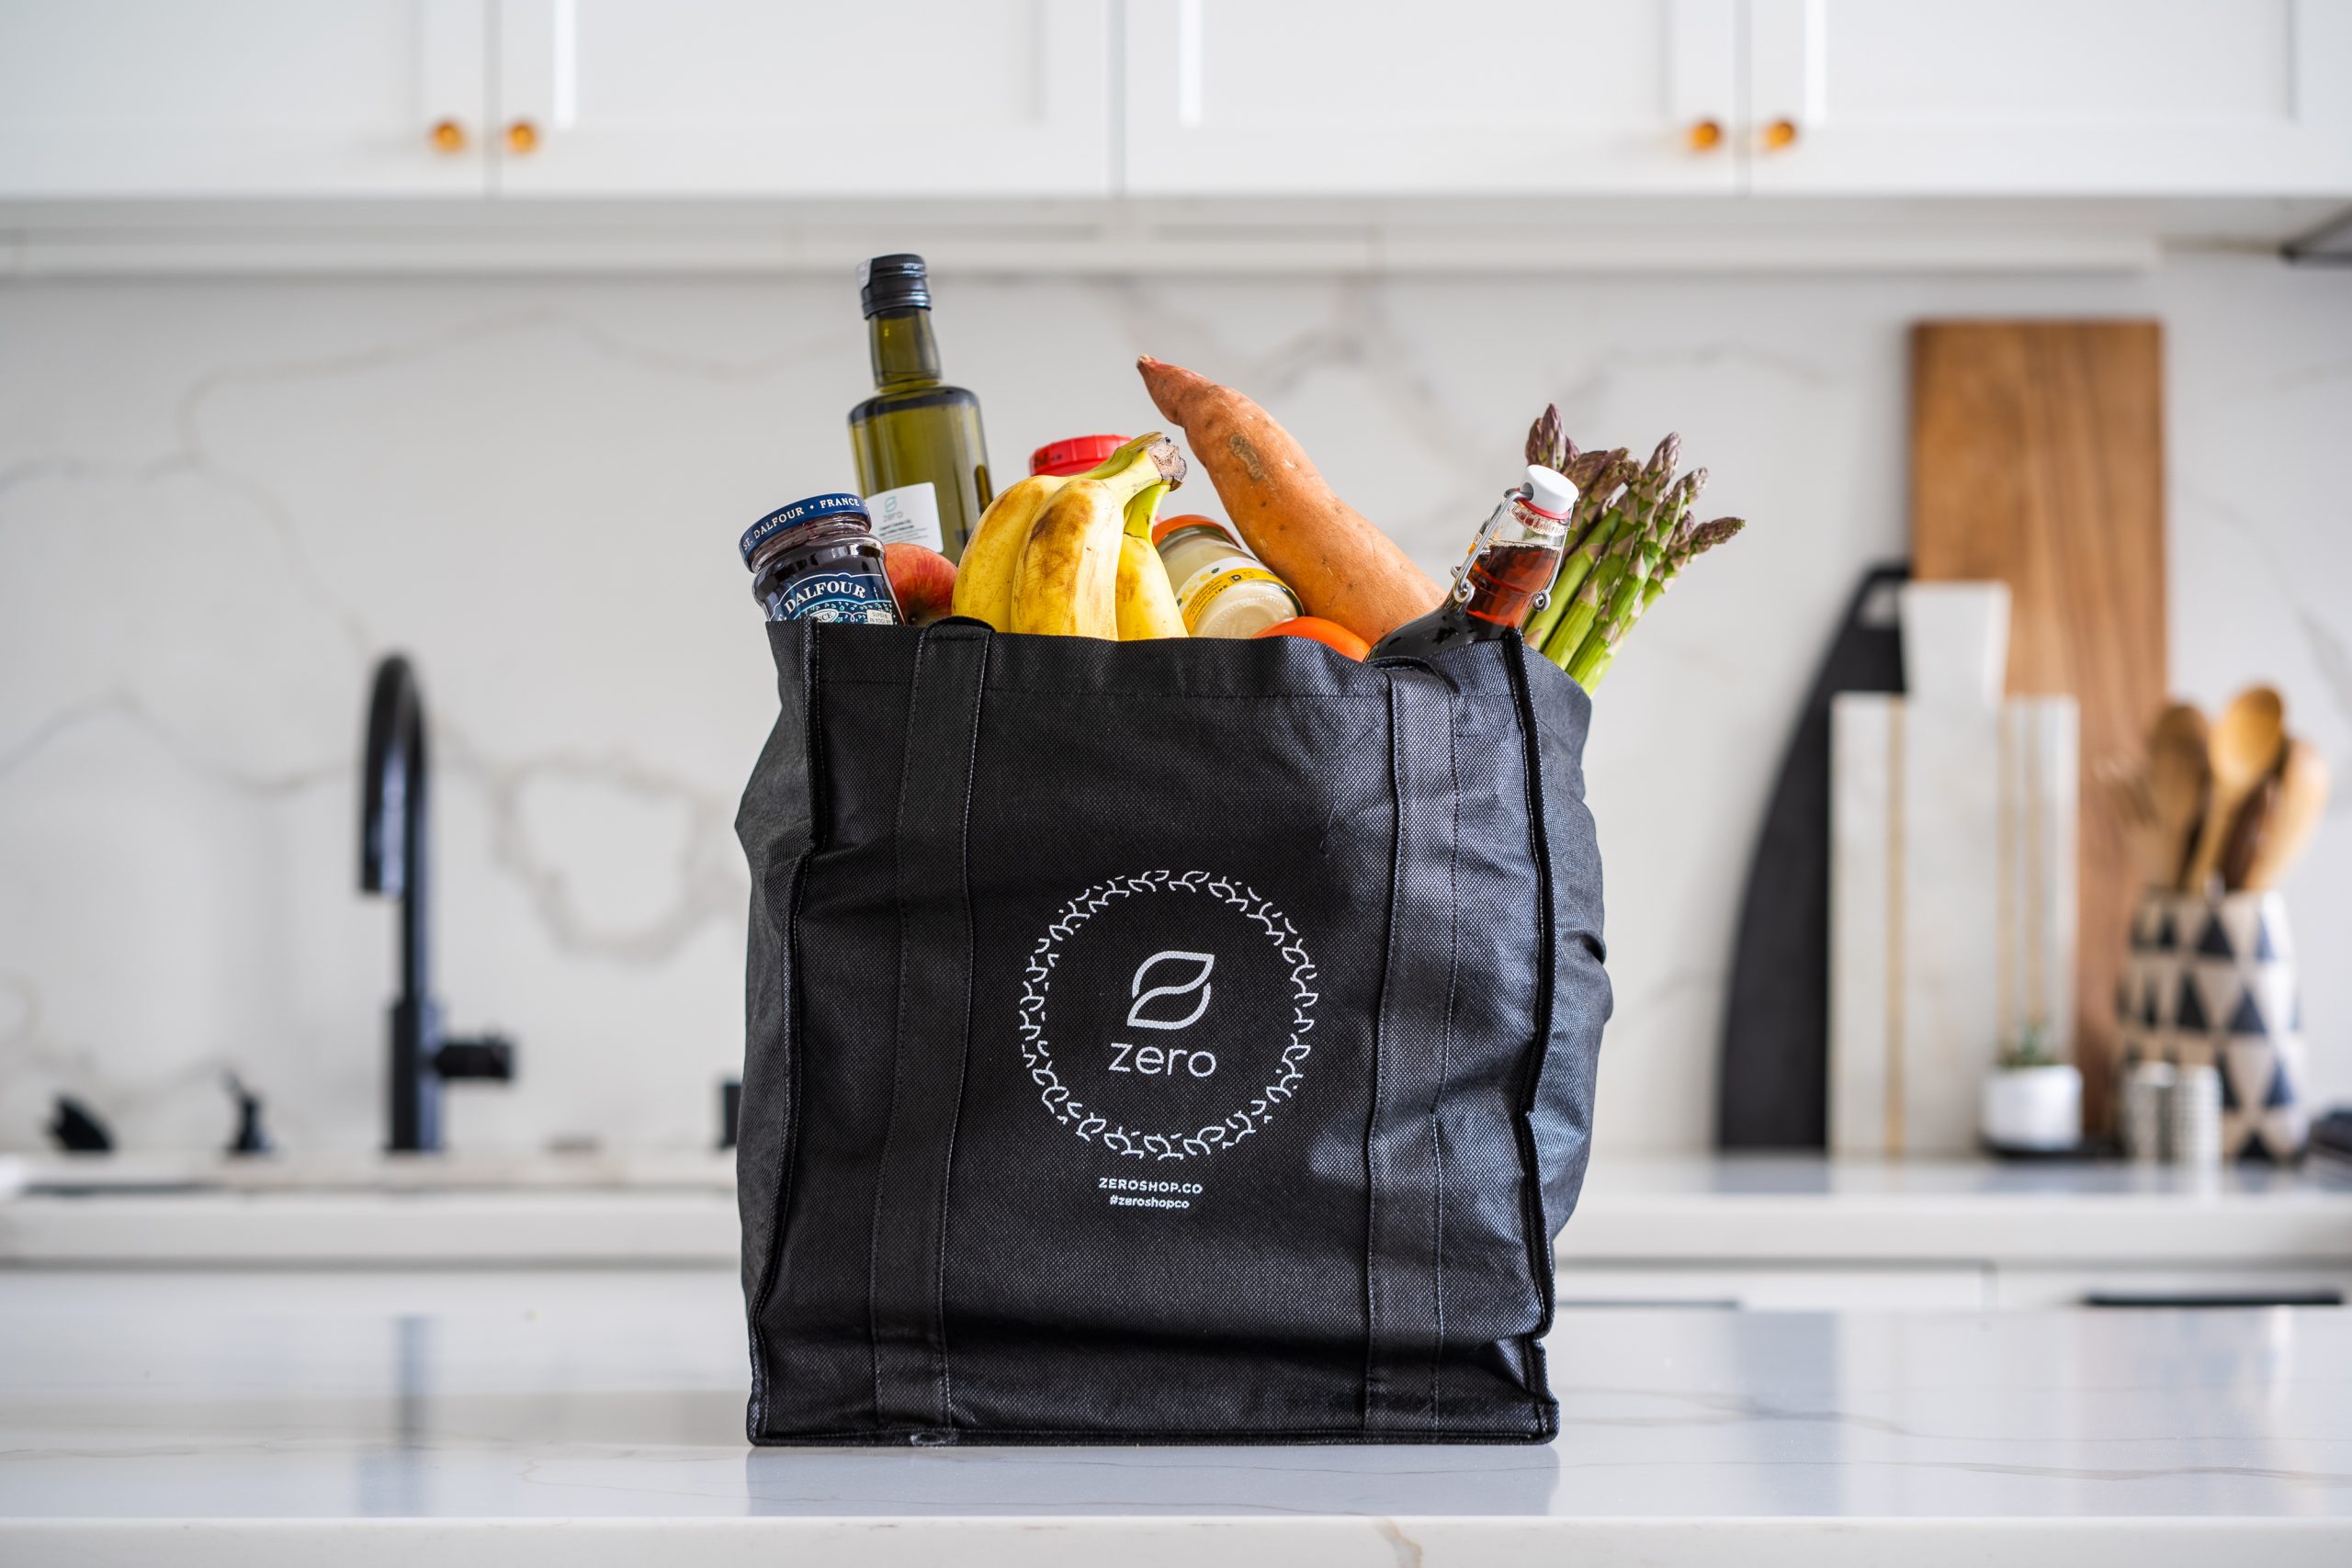 Online Grocery Delivery Service Company Zero Expands To Los Angeles, Growing Its Reach In The Plastic-free Food Market